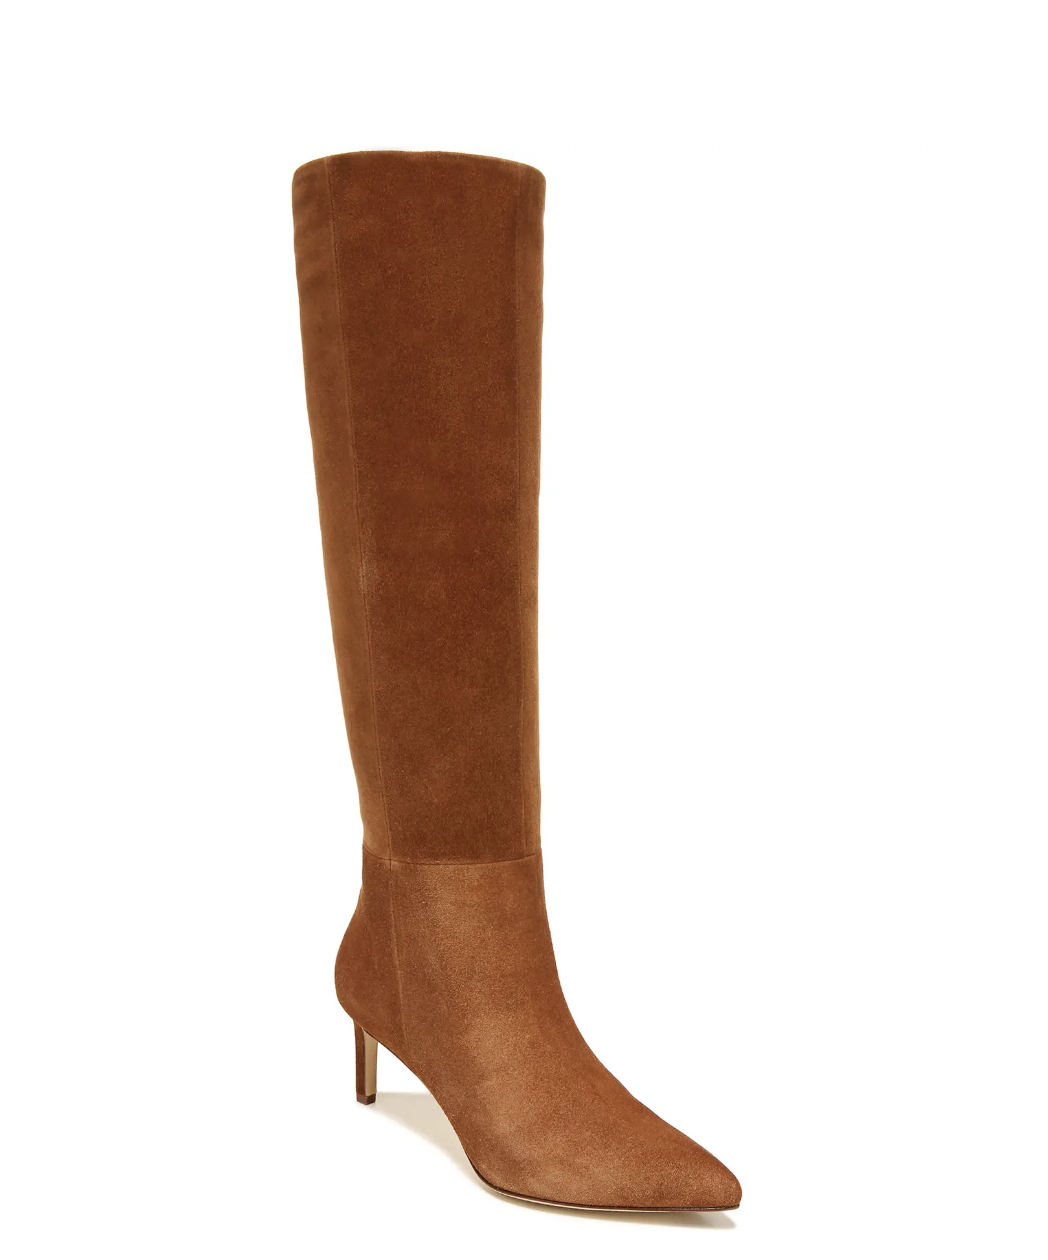 nordstrom anniversary sale, nordstrom anniversary sale 2022, nordstrom anniversary sale catalog, nordstrom anniversary sale favorites, nordstrom anniversary sale must haves, nsale over 40, nordstrom anniversary sale over 40, what to buy at nordstrom anniversary sale, erin busbee, busbee style, fashion over 40, veronica beard lavaca knee high boots